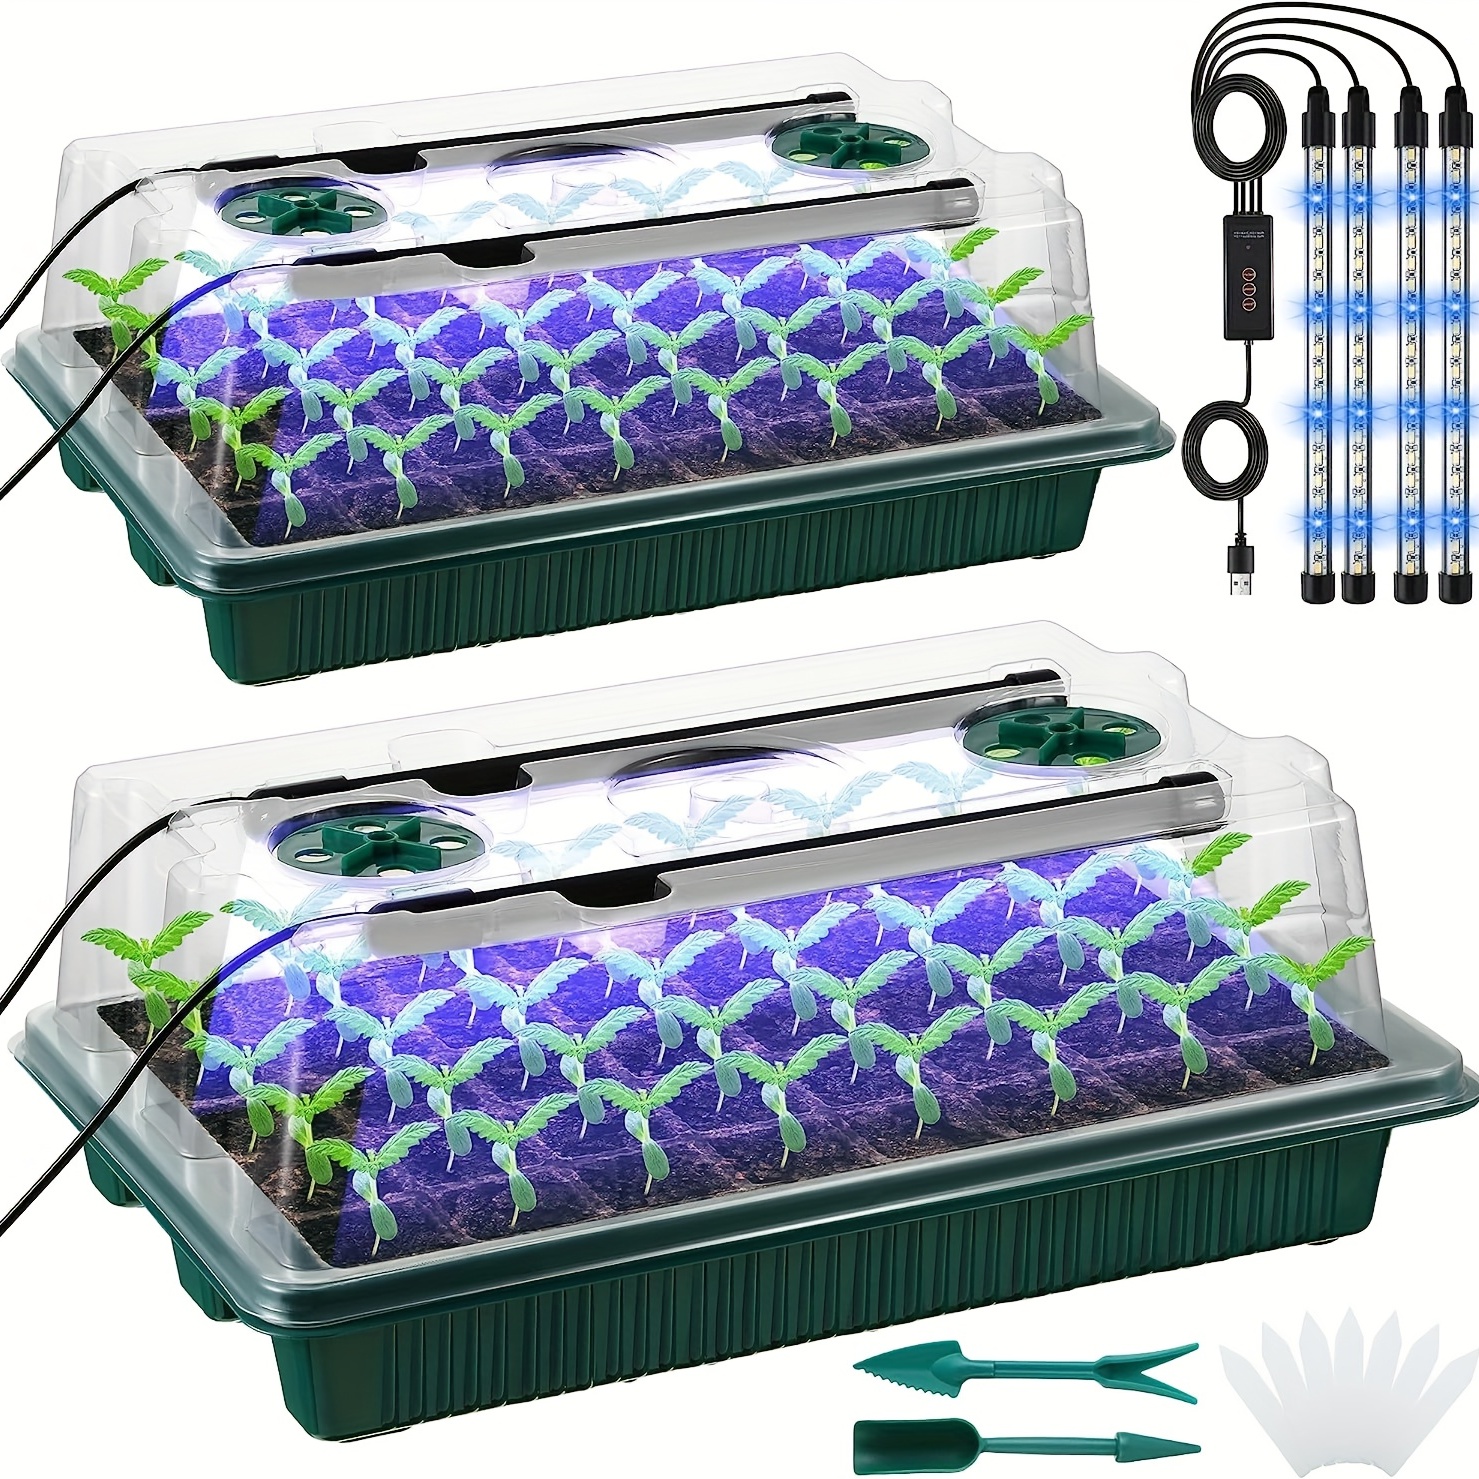 Upgraded Light] Seed Starter Kit with Grow Light - Durable Seed Tray, 60  Cell Seed Starting Tray, Humidity Dome for Seed Growing Germinating,  Seedling Starting, Cutting Clone & Plant Propagation Kit 